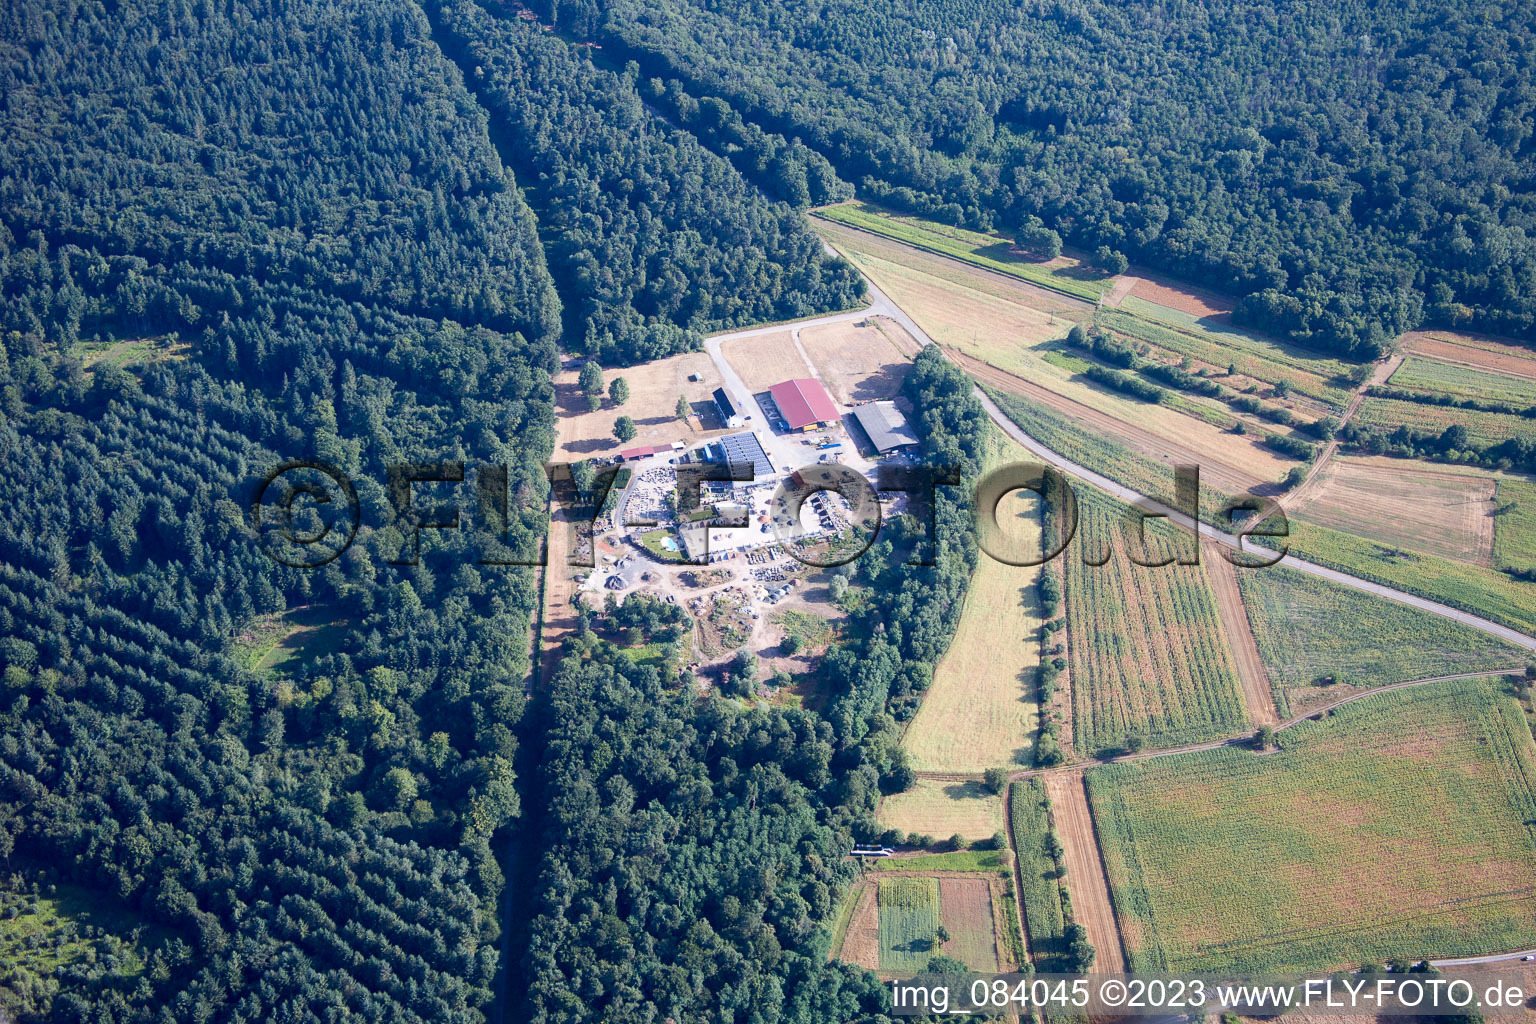 Palatinum landscape and garden design in Hagenbach in the state Rhineland-Palatinate, Germany from above